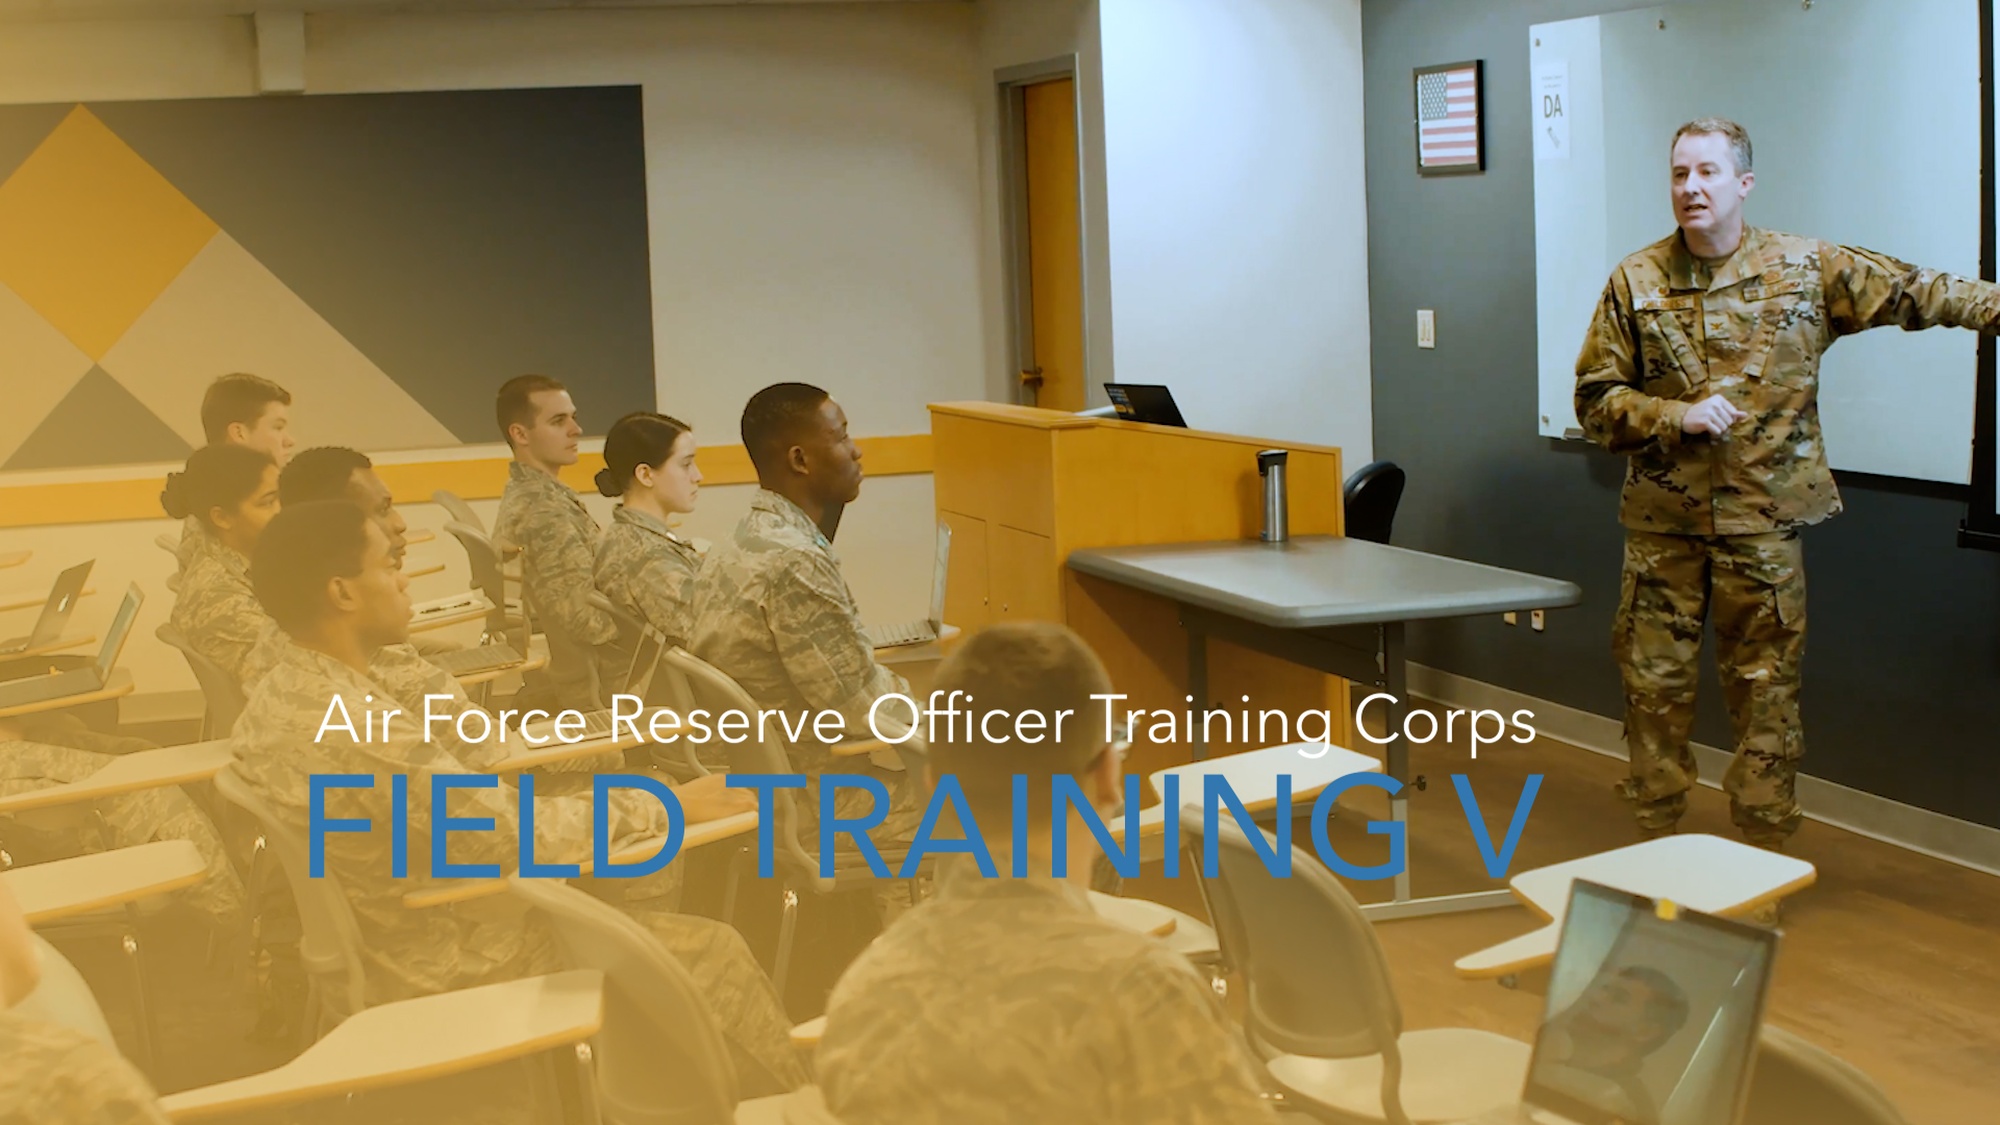 Air Force Reserve Officer Training Corps worked with Air Force Officer Training School to revamp their entire approach to training future officers at Field Training. They didn't just rework and update the curriculum, they changed their entire battle rhythm and approach to produce officers for future conflict and warfighting. (U.S. Air Force video by Robert Dantzler)